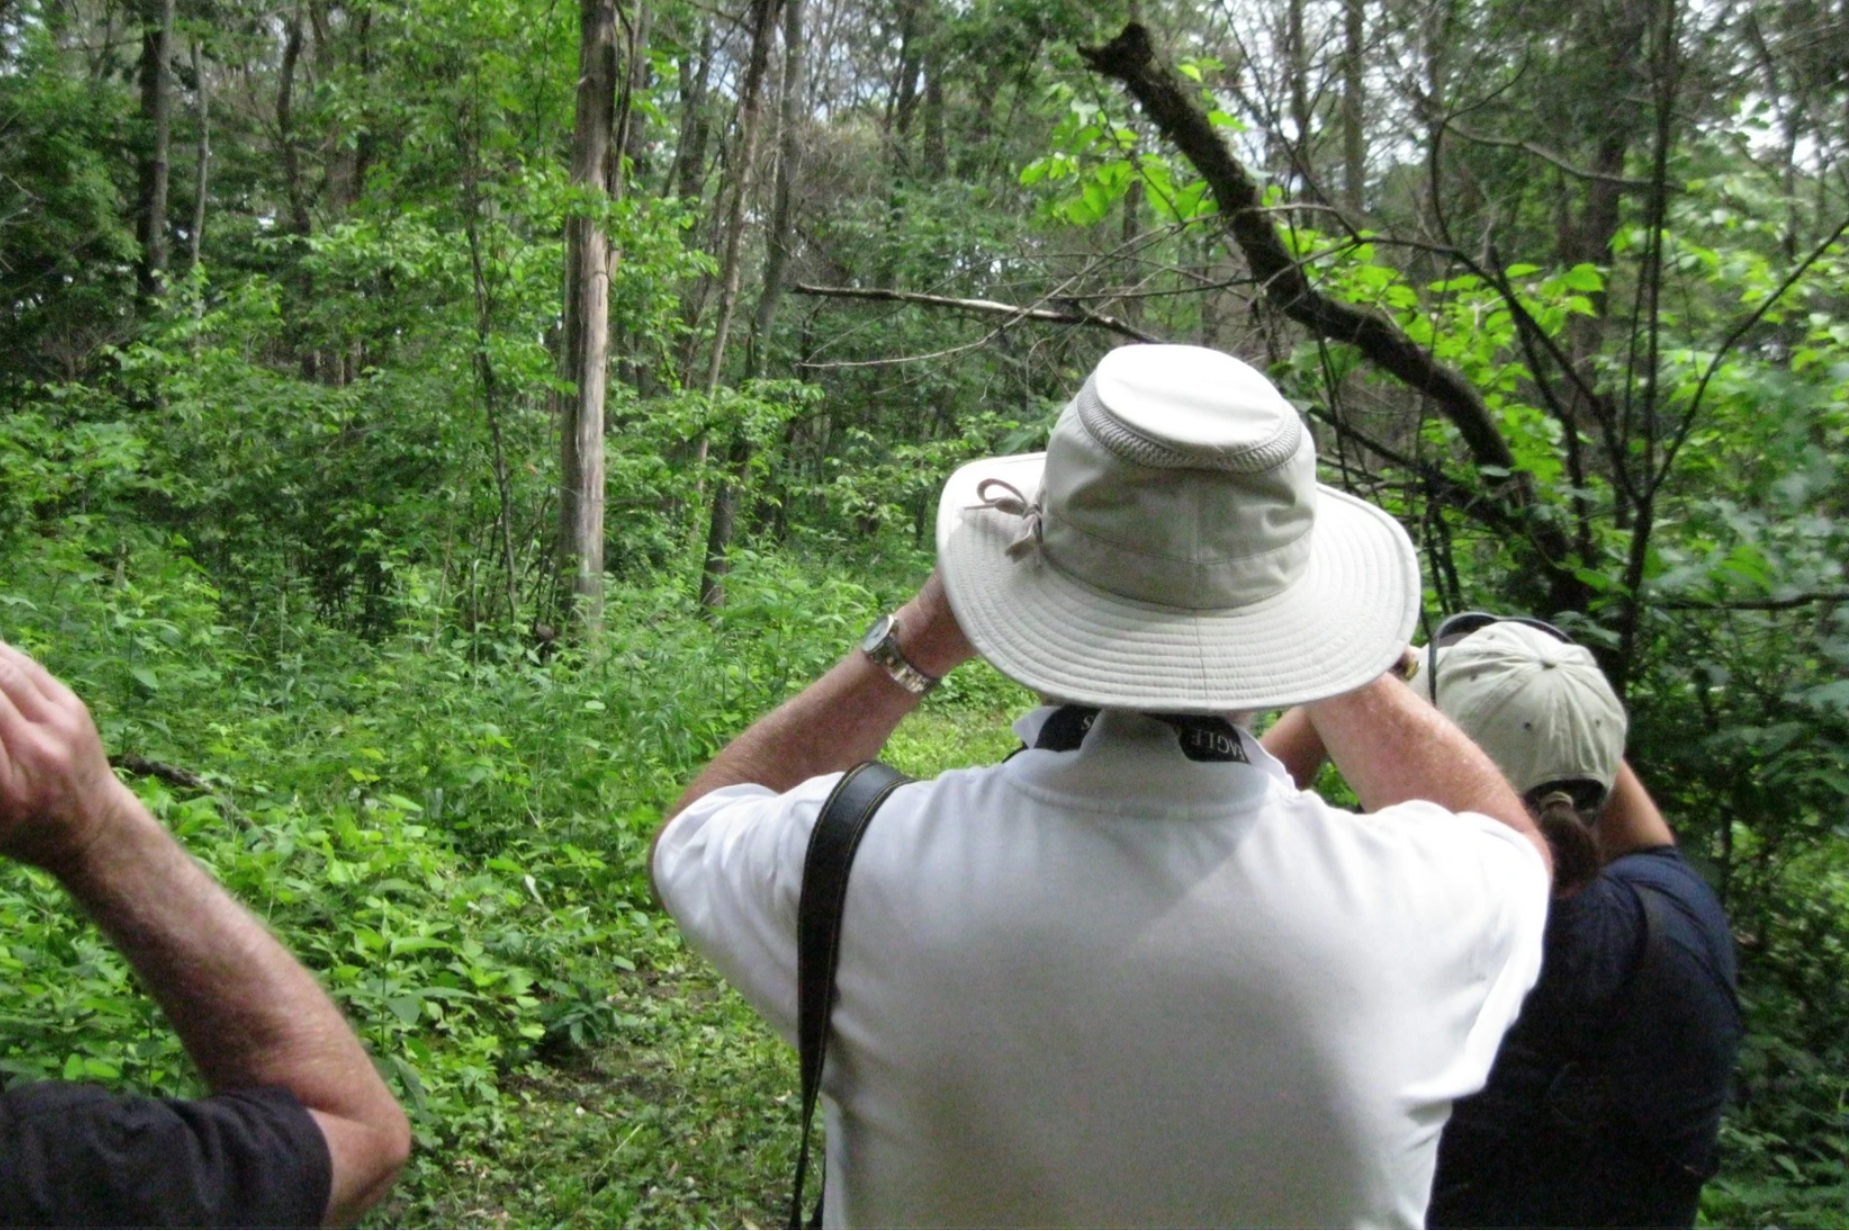 Three individuals look through binoculars in a green forest. They are facing away from the camera.